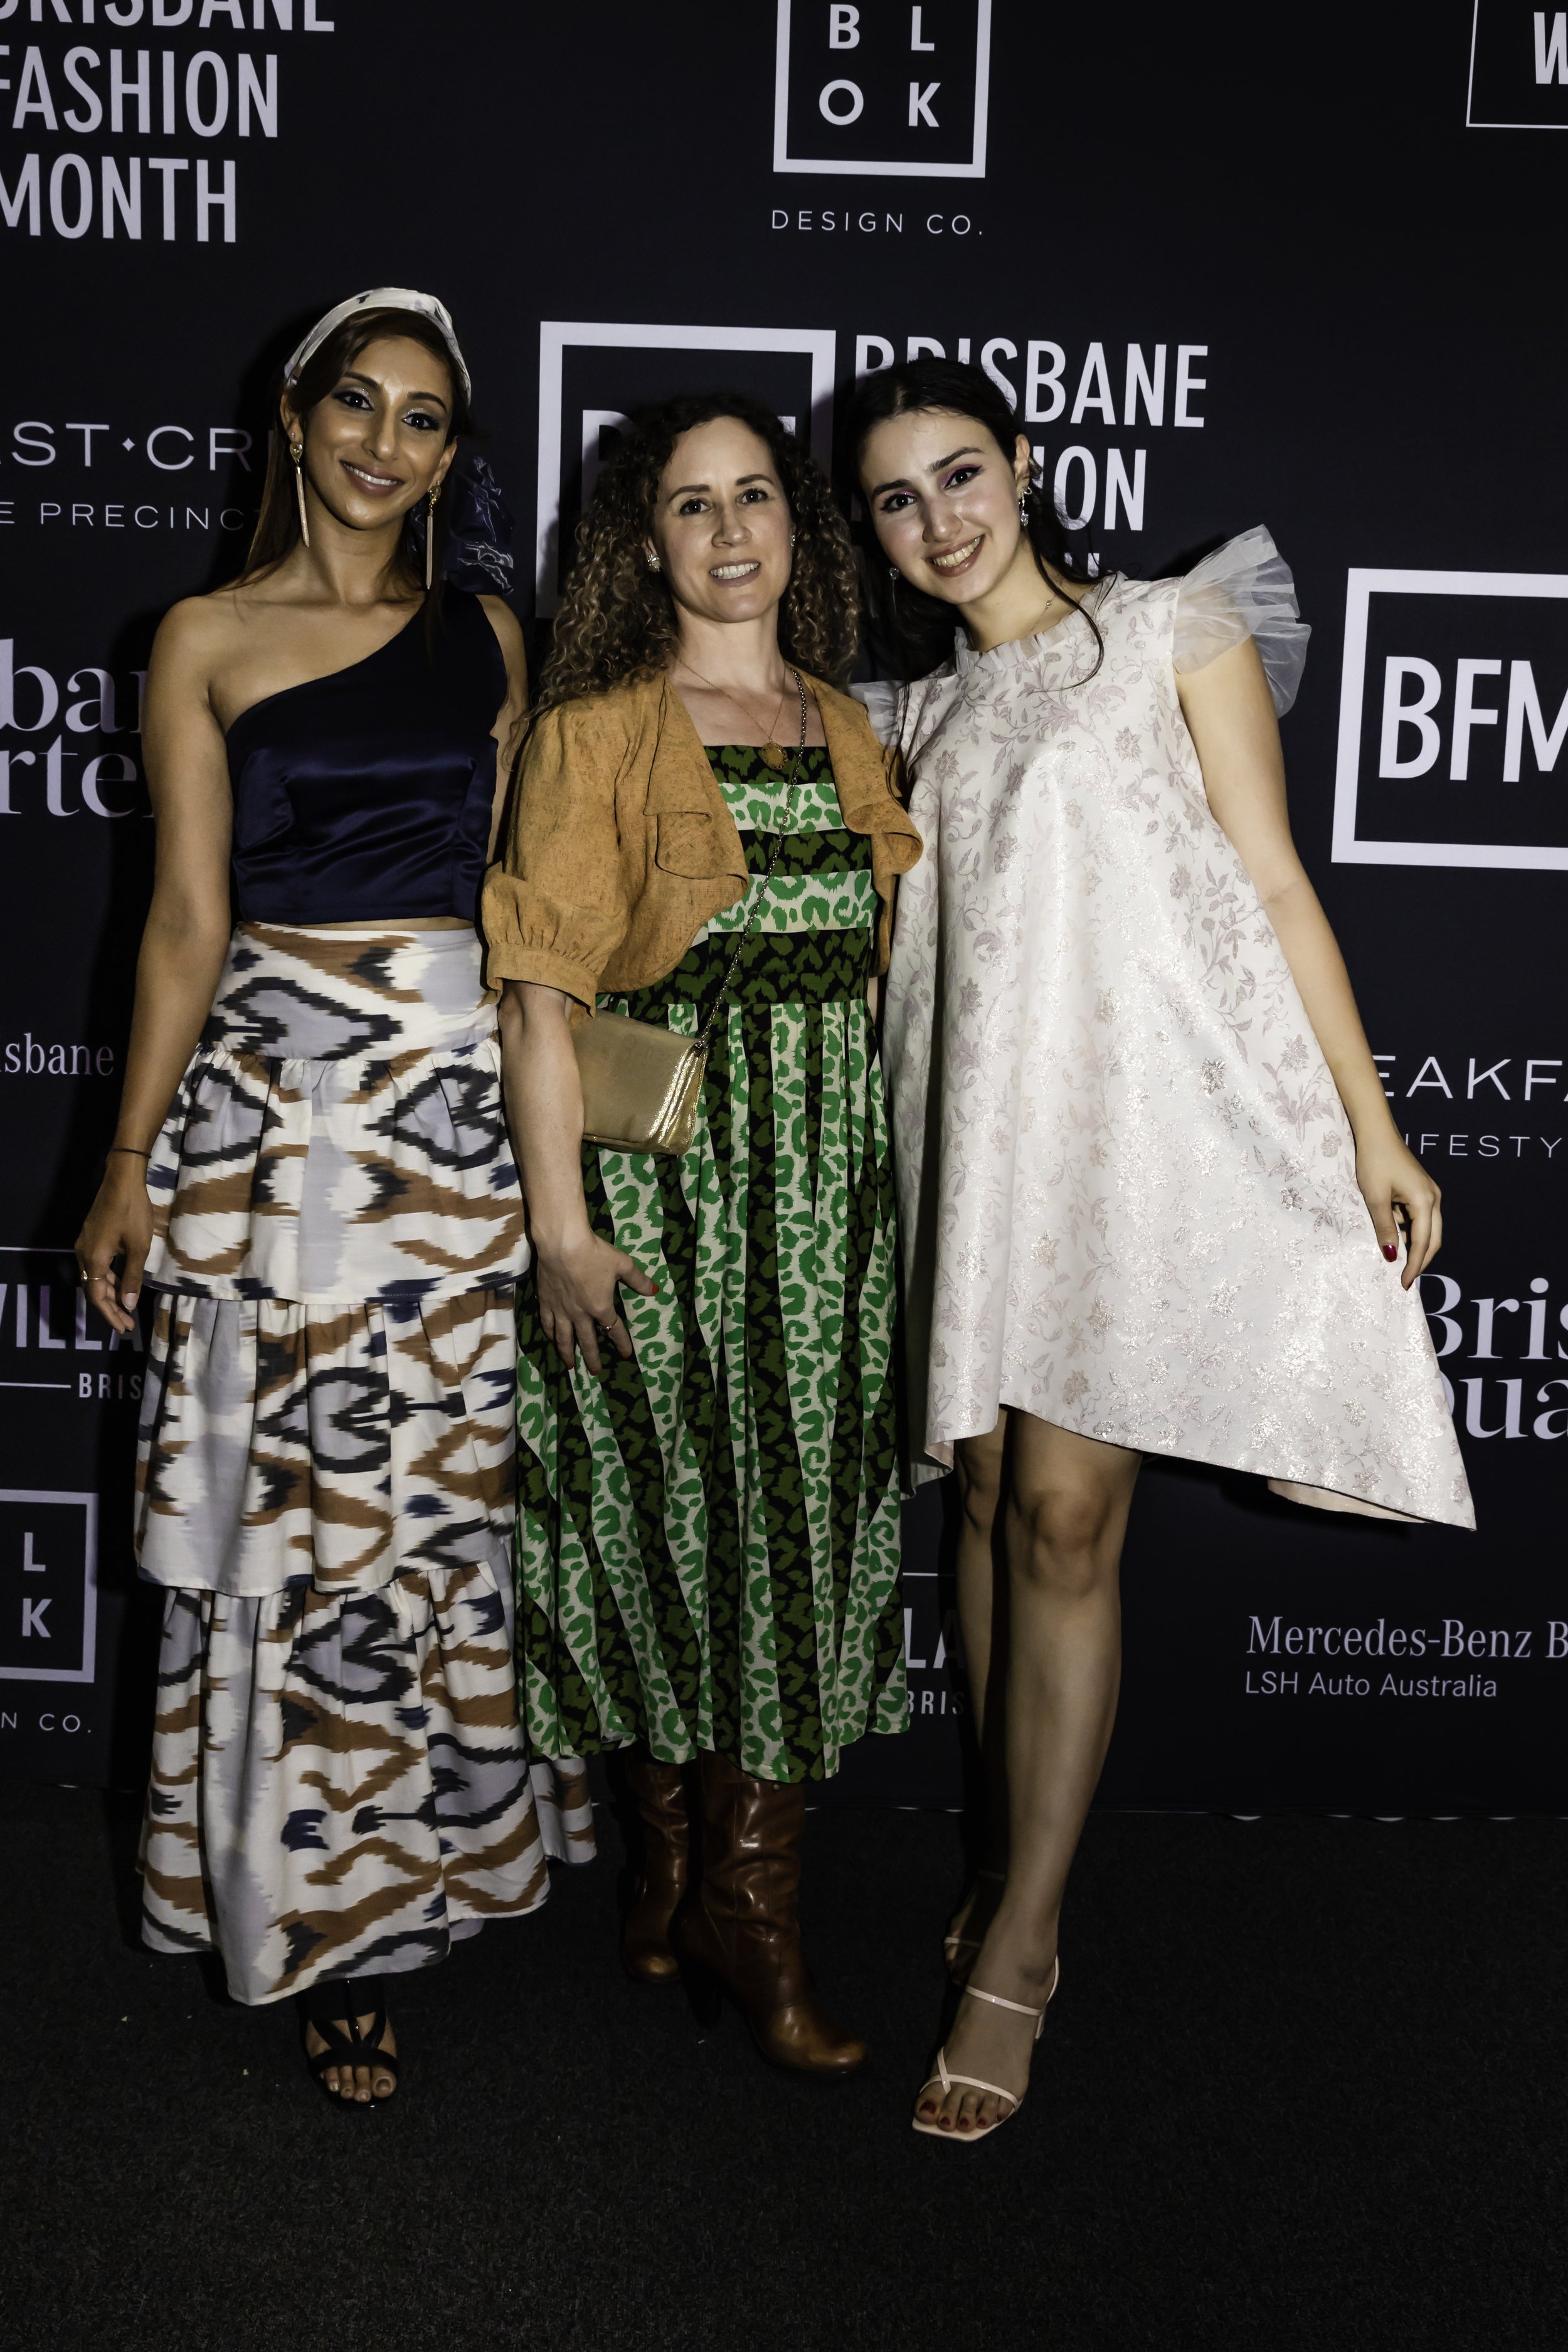 Designers of Charmani, a hop and a skip and Maven label at Brisbane Fashion Month runway event